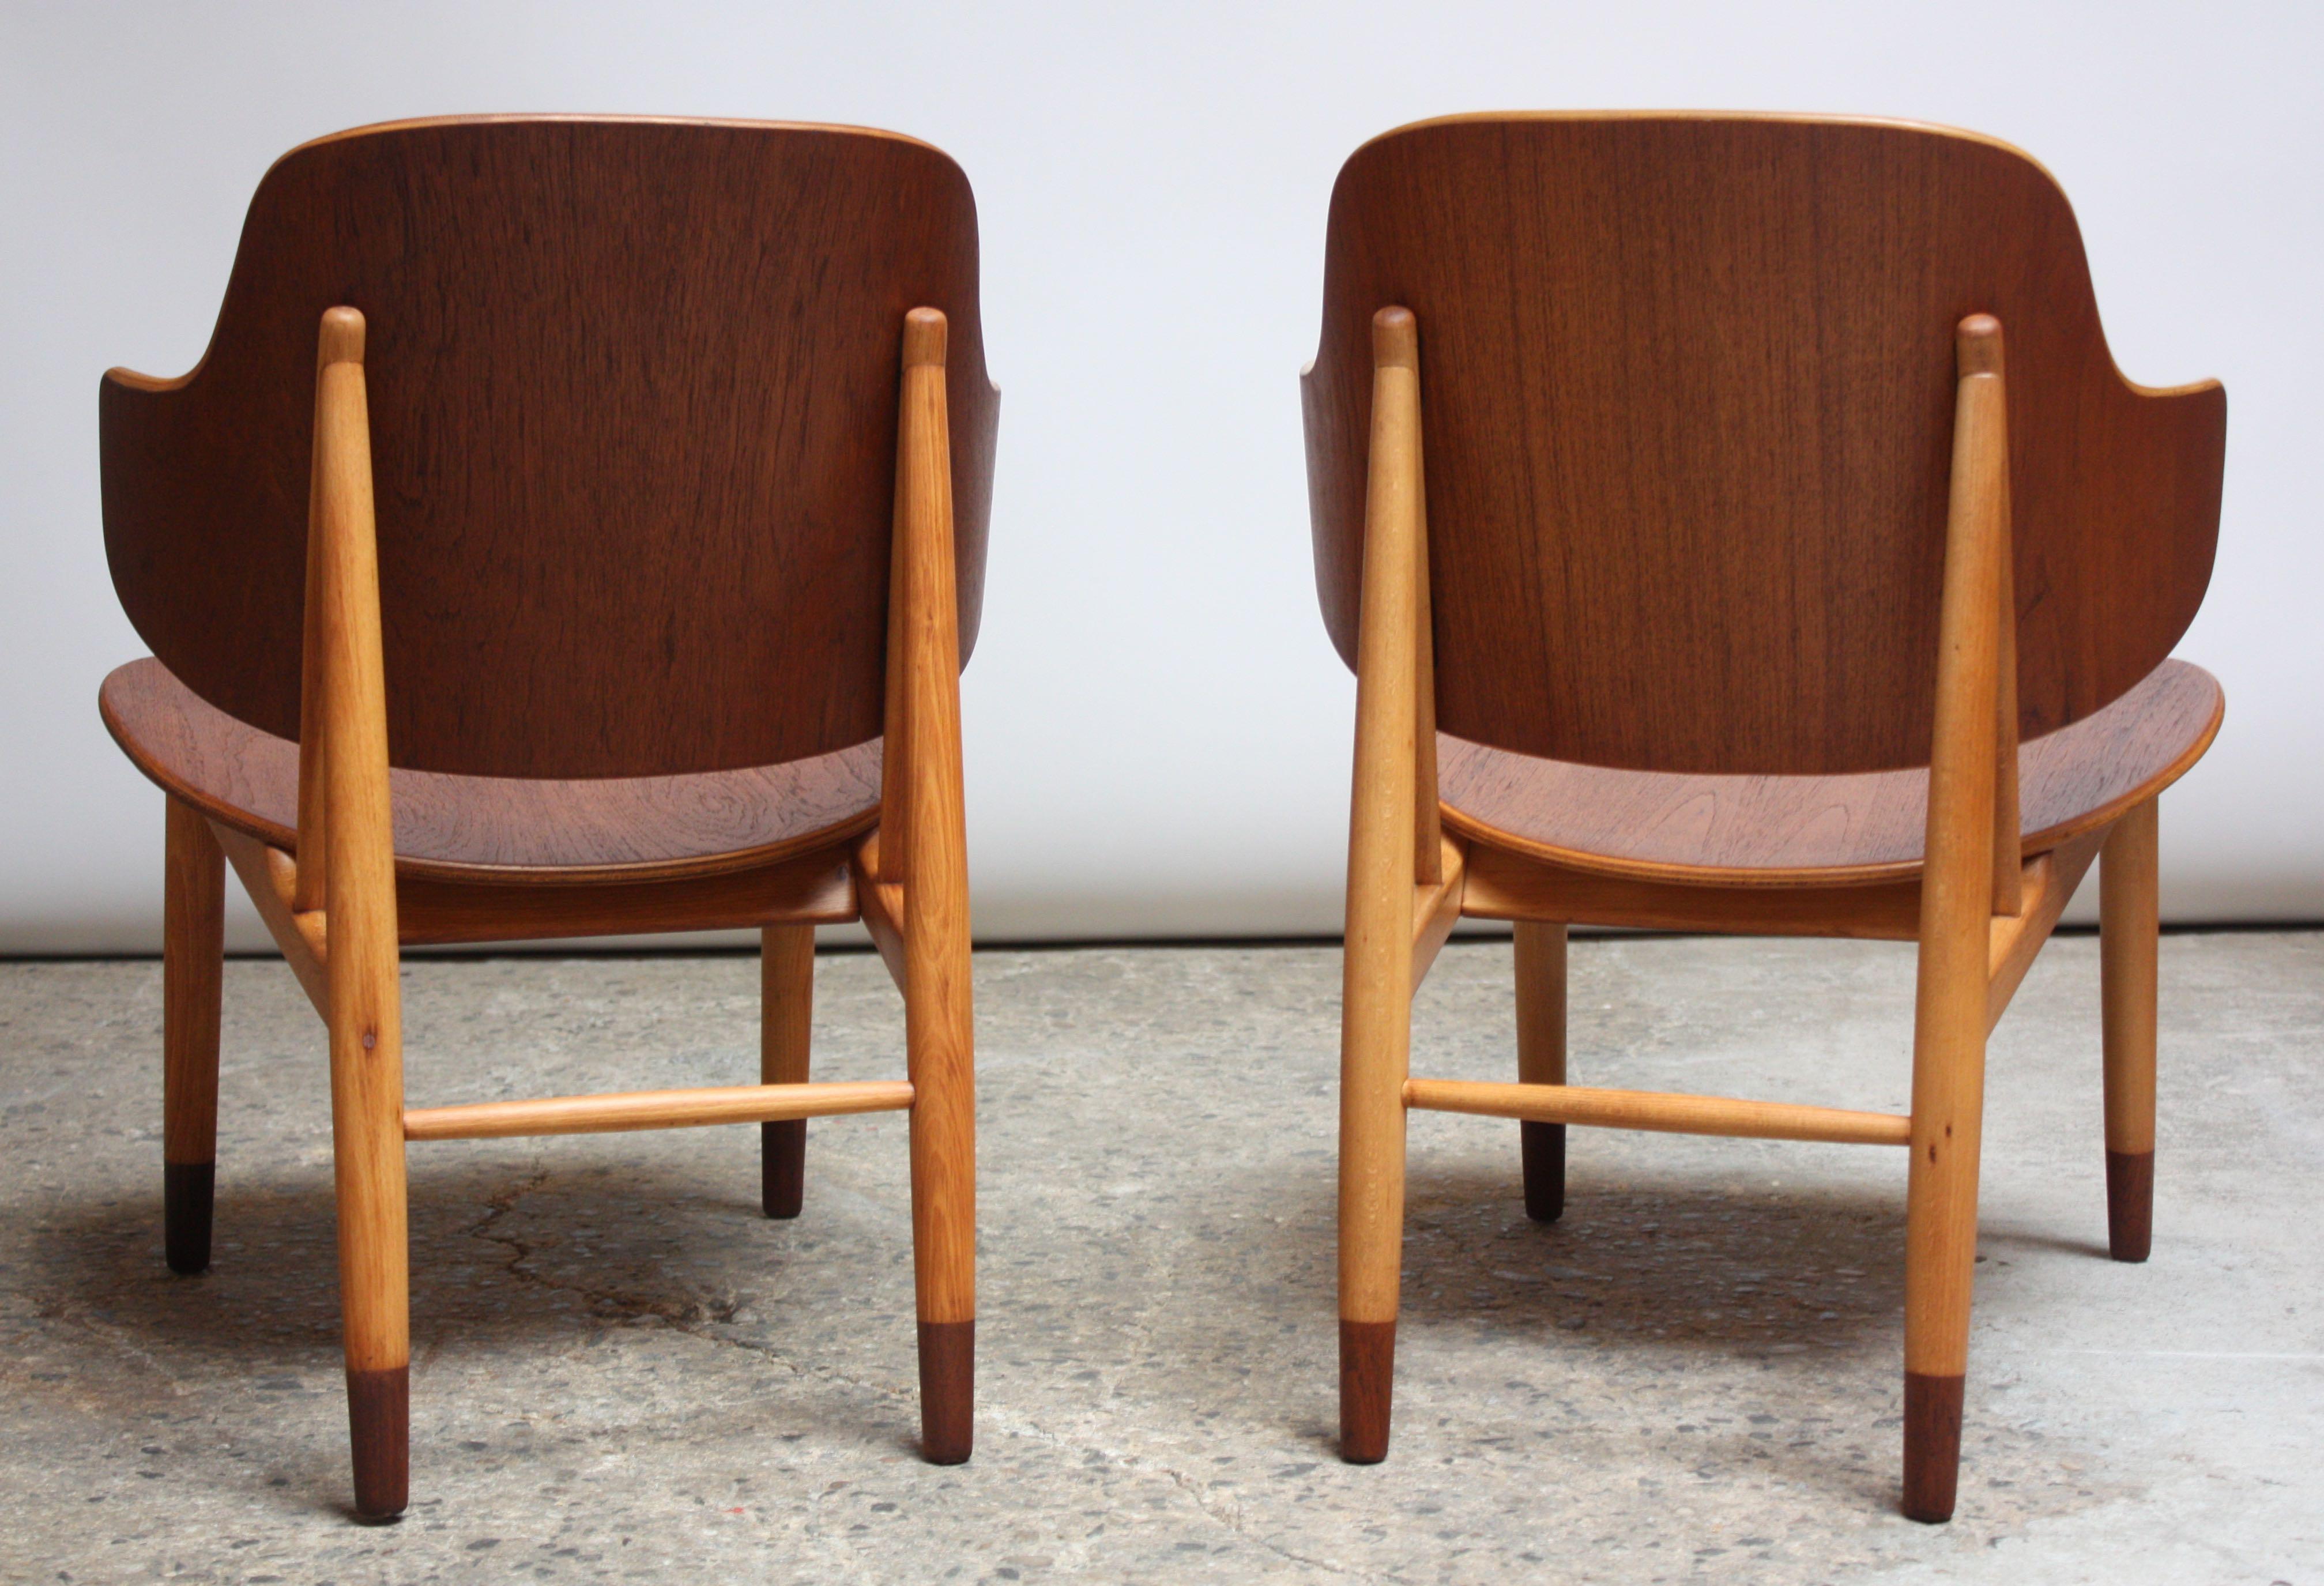 Pair of Danish Sculptural Shell Chairs by Ib Kofod-Larsen in Teak and Beech For Sale 5